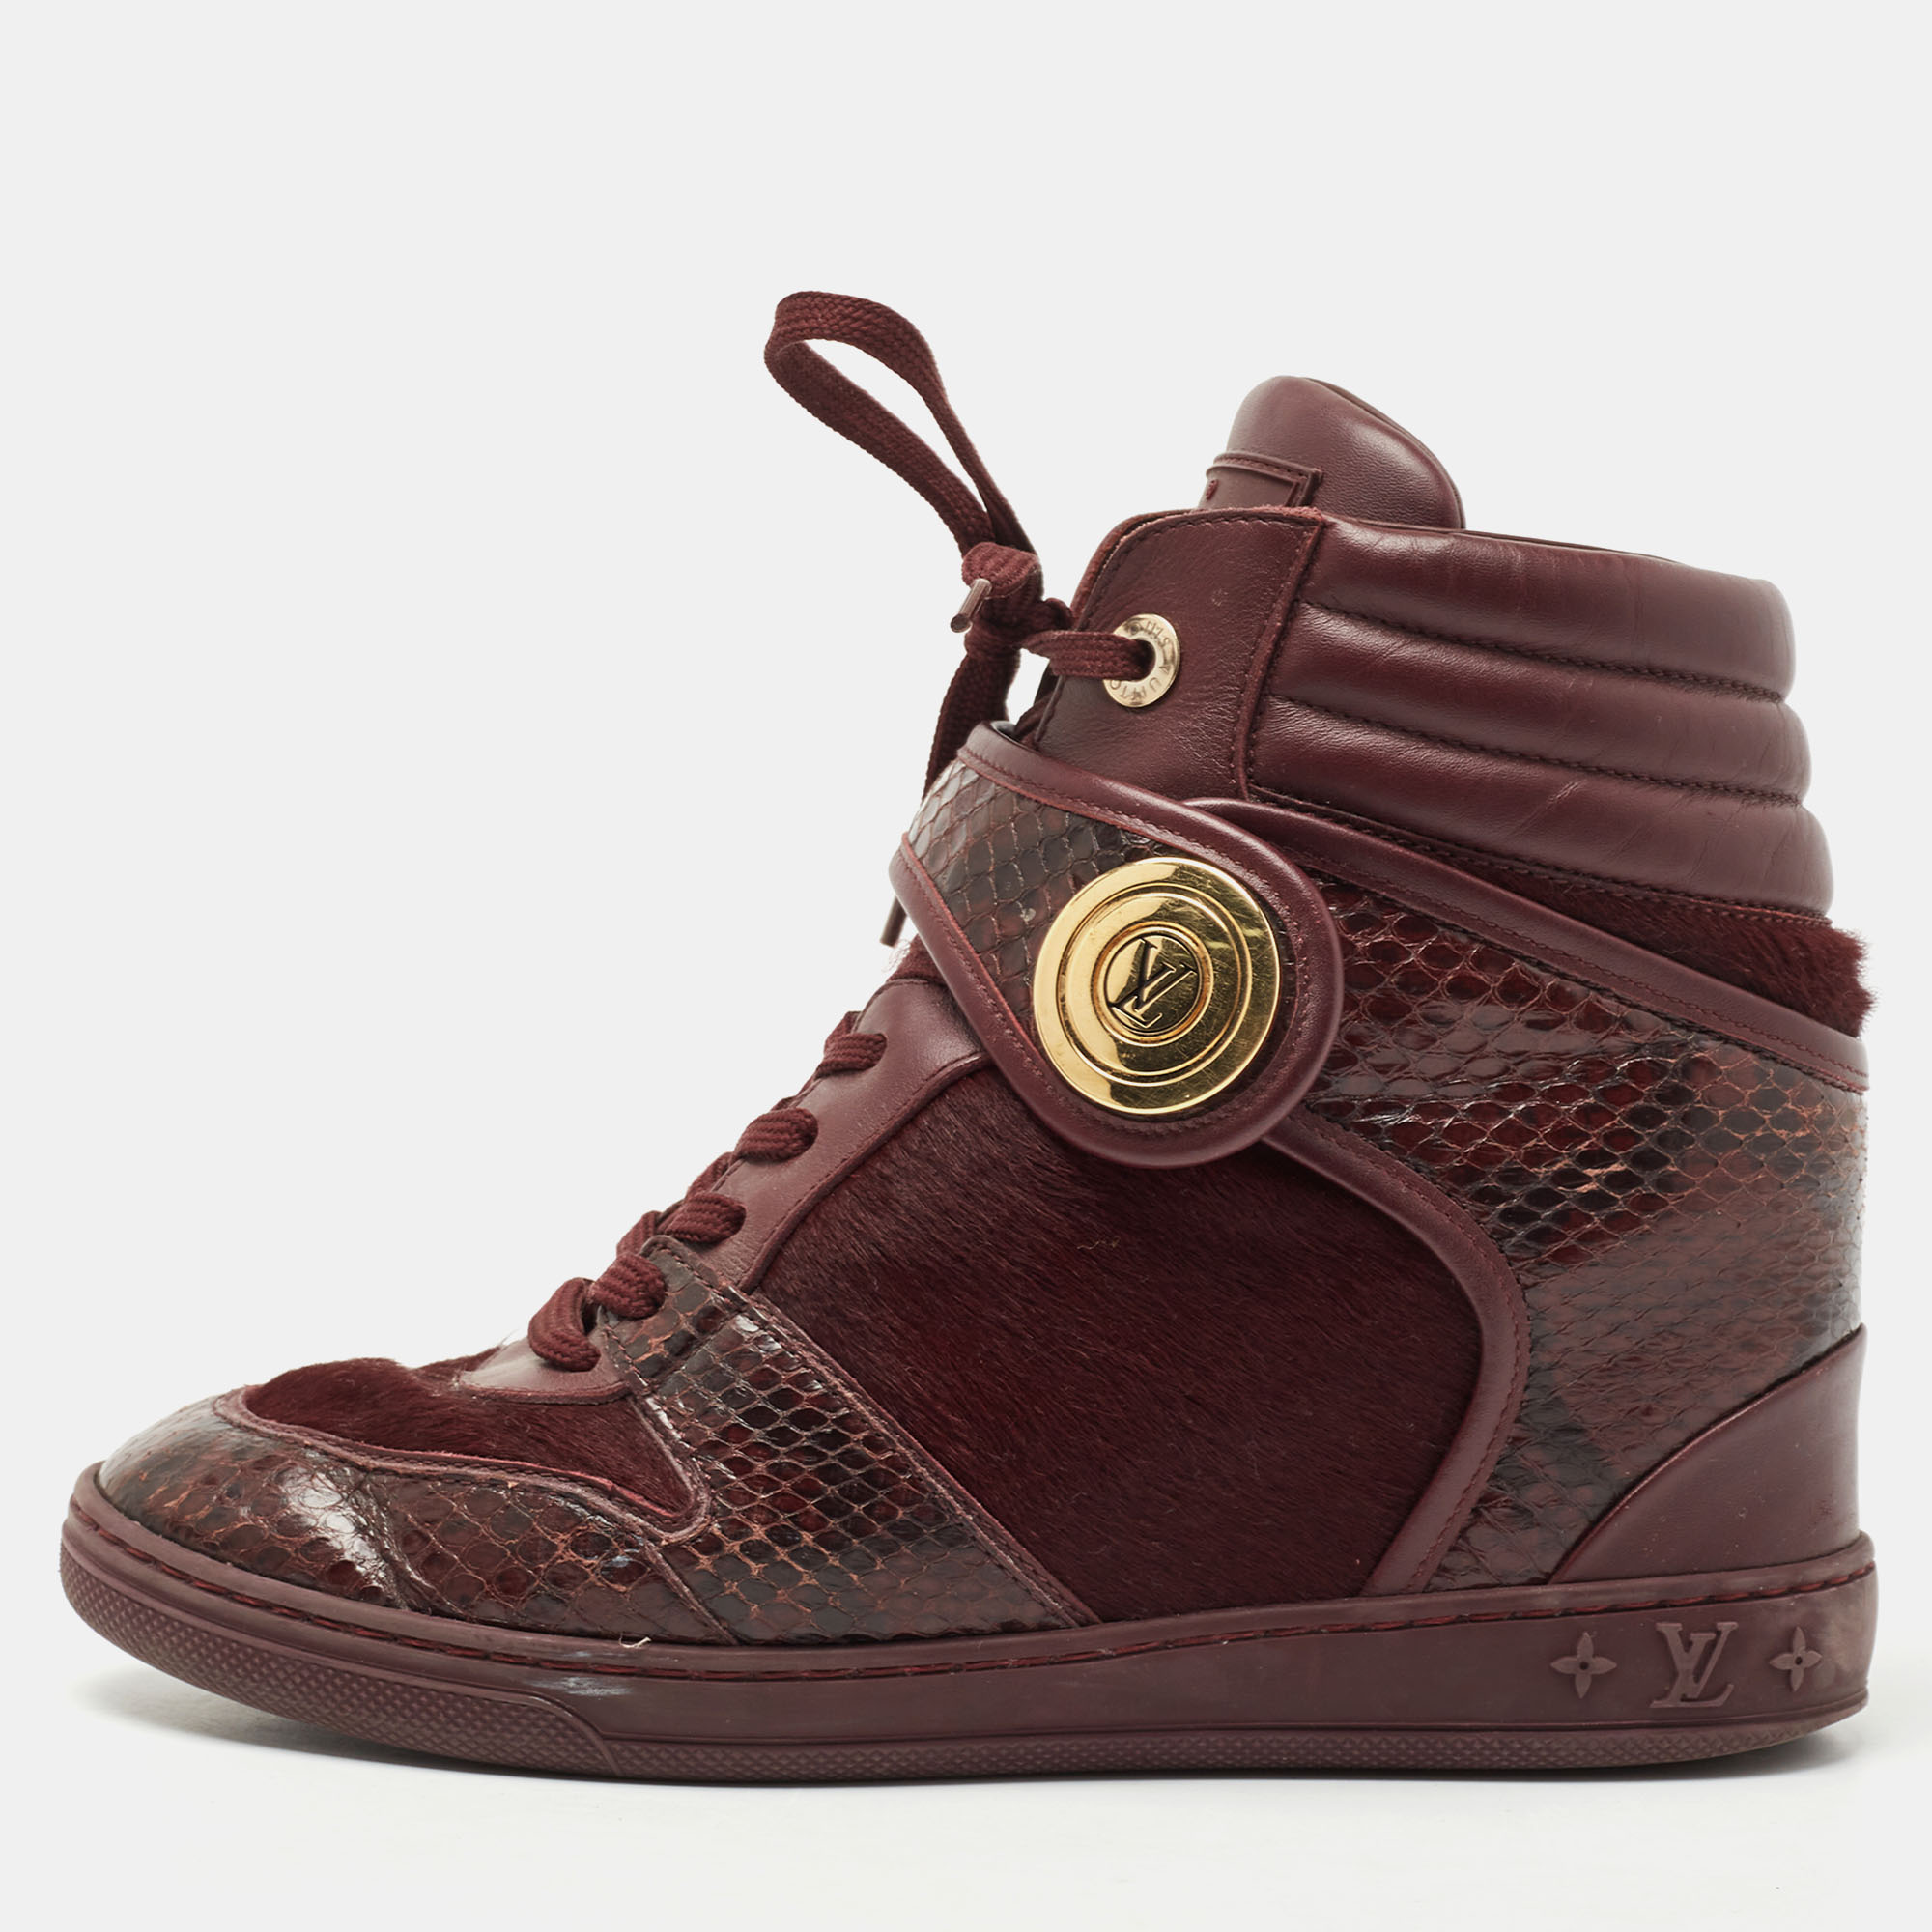 Pre-owned Louis Vuitton Burgundy Calf Hair And Python Leather High Top Sneakers Size 37.5